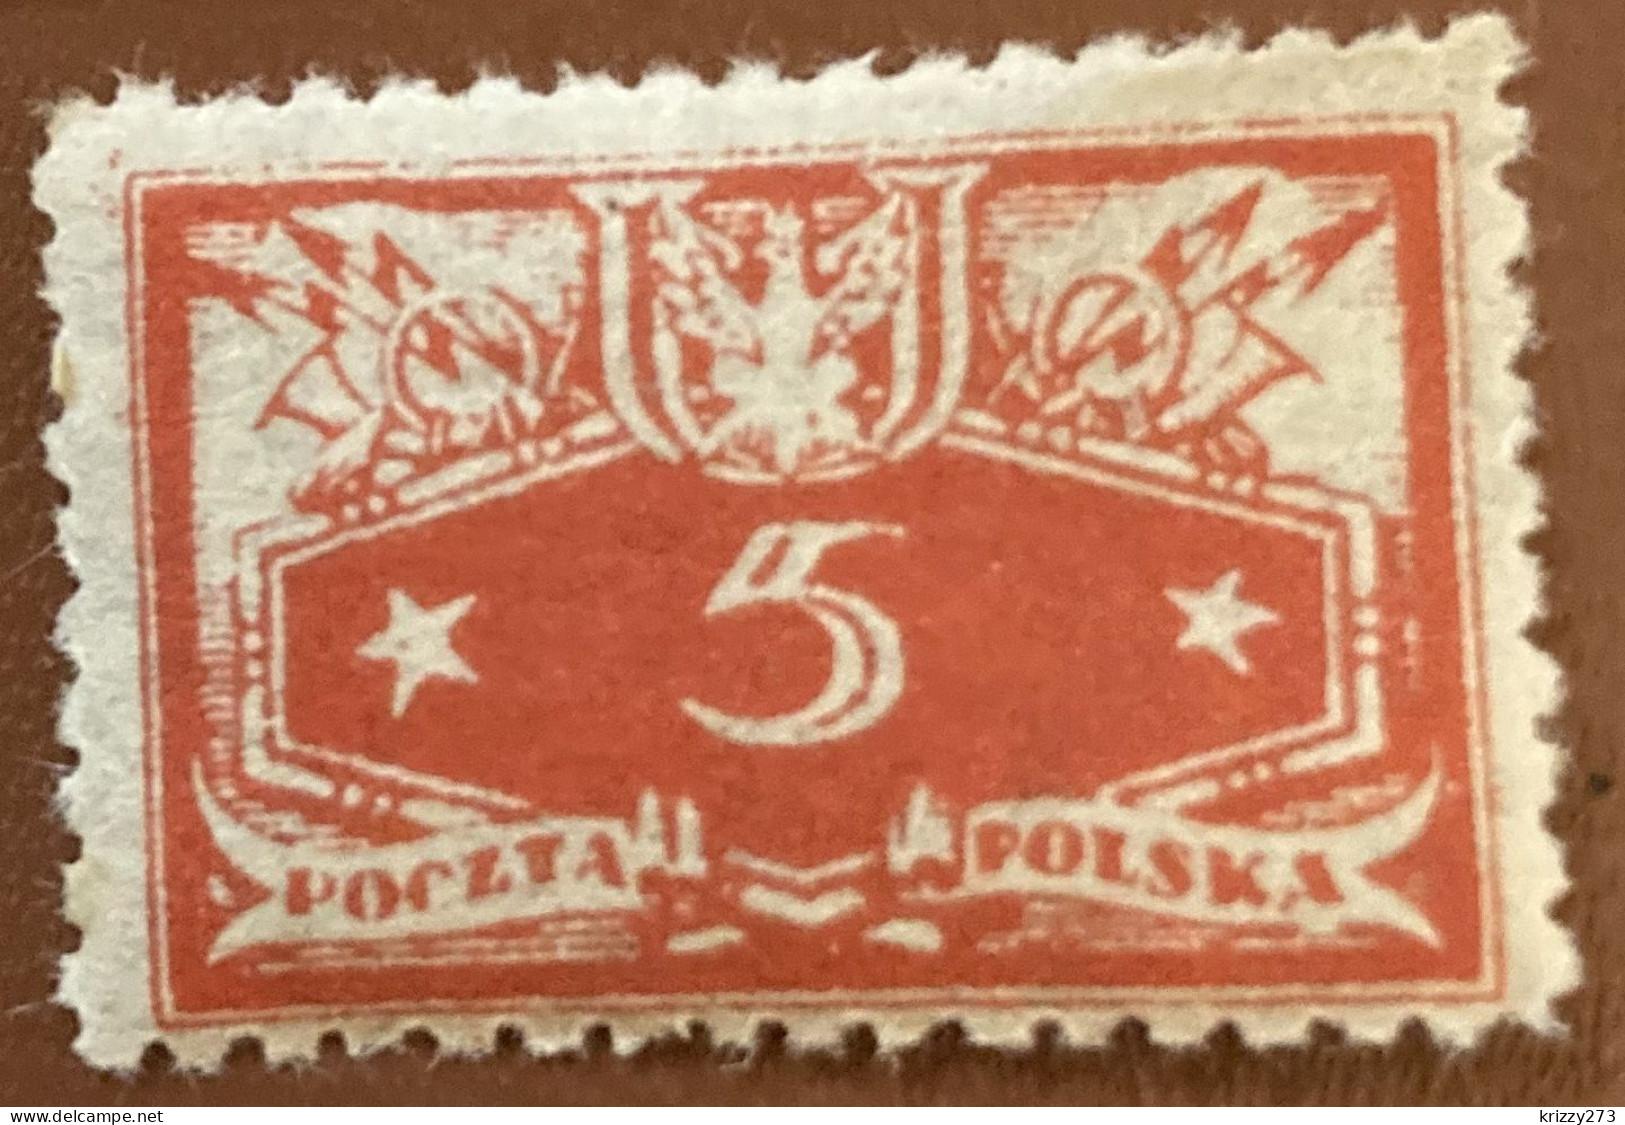 Poland 1920 Official Numeral 5 F - Used - Service